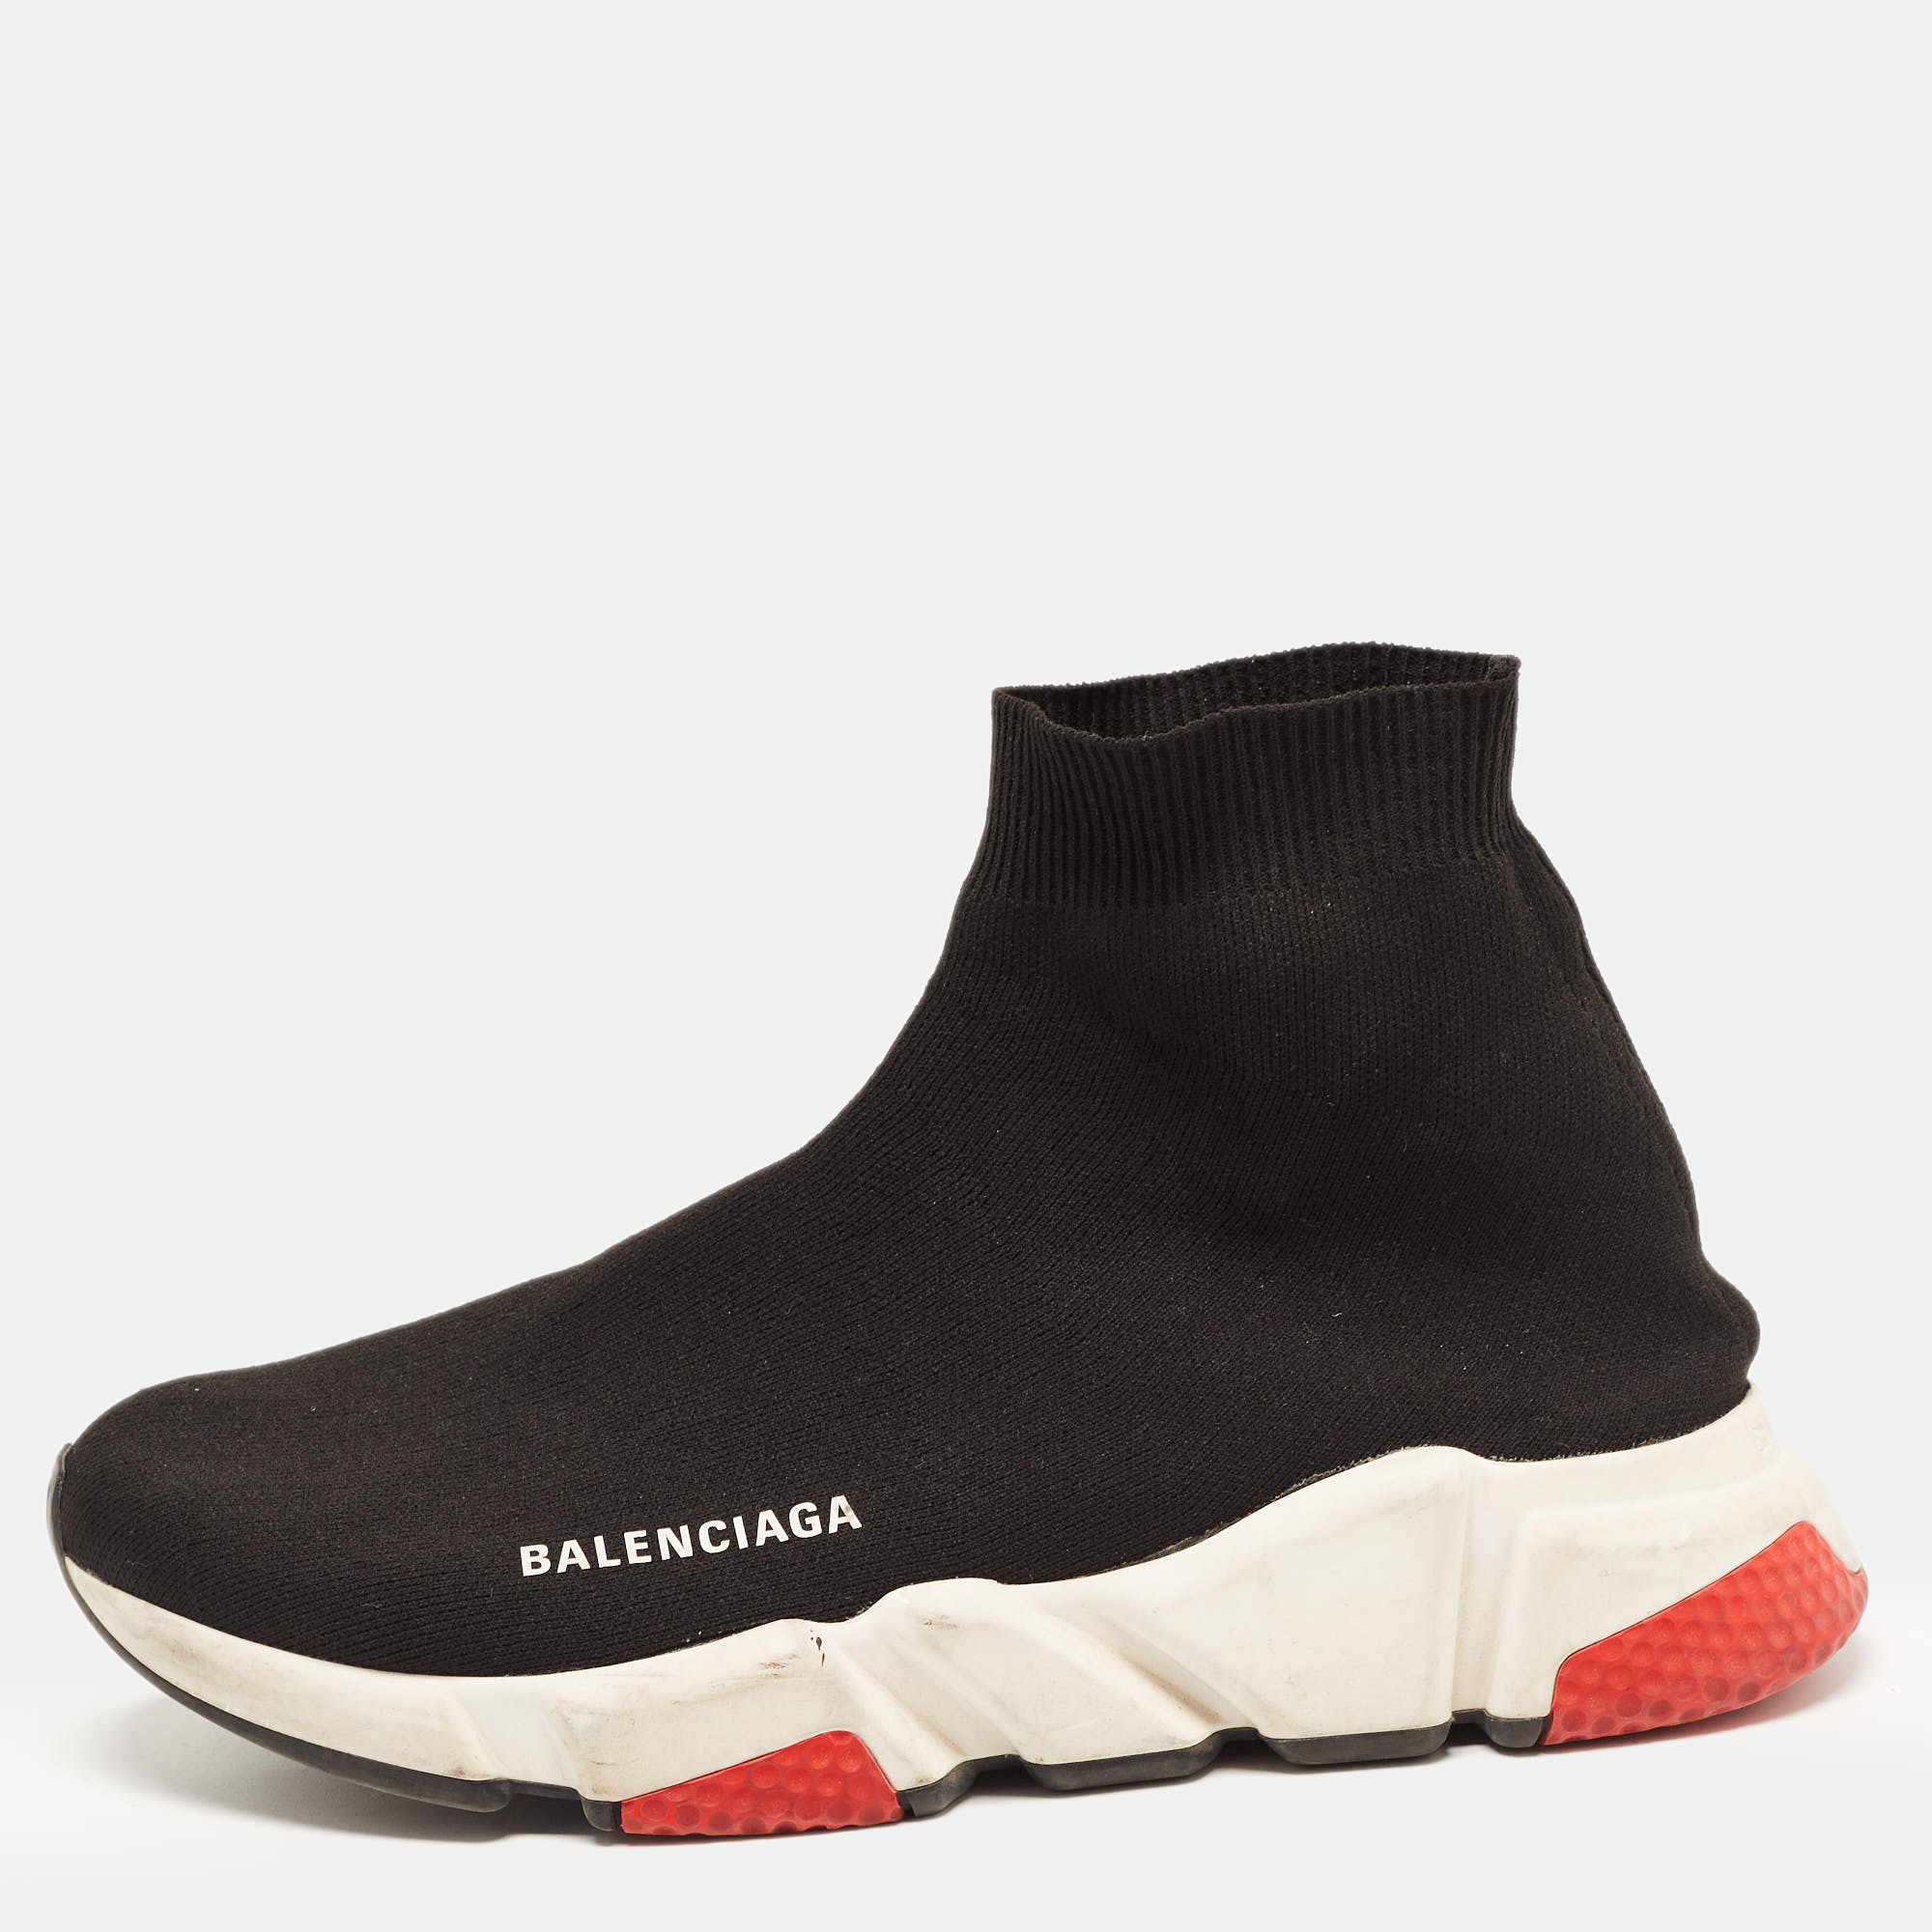 Balenciaga Black Knit Fabric Speed Trainer High Top Sneakers Size 39